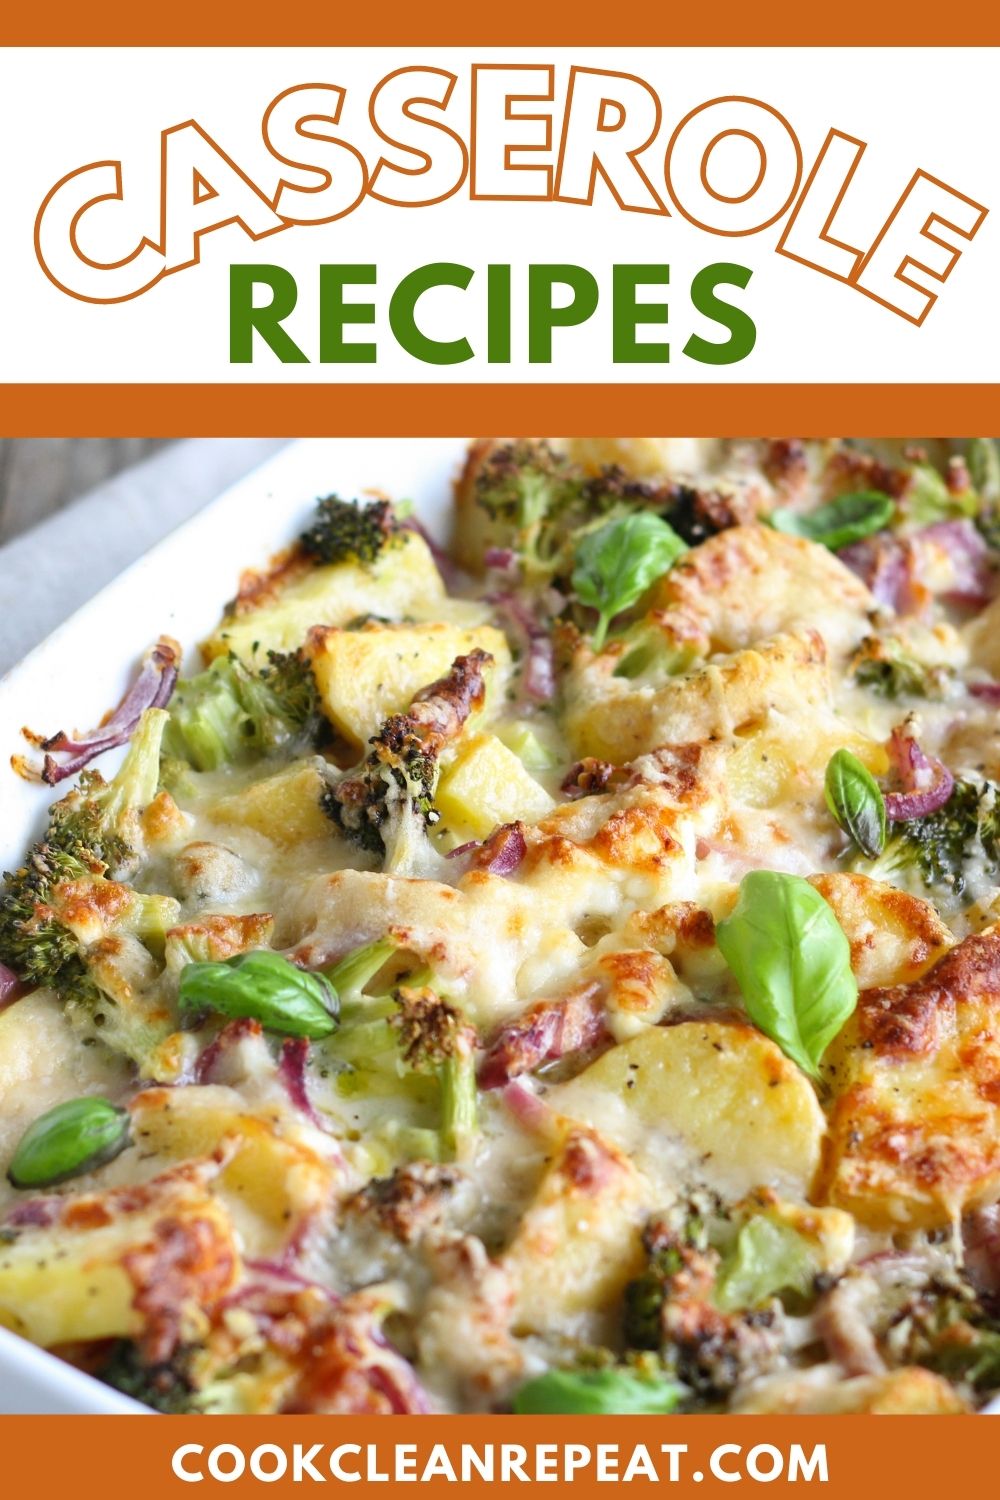 Pinterest image for Easy and Delicious Casserole Recipes